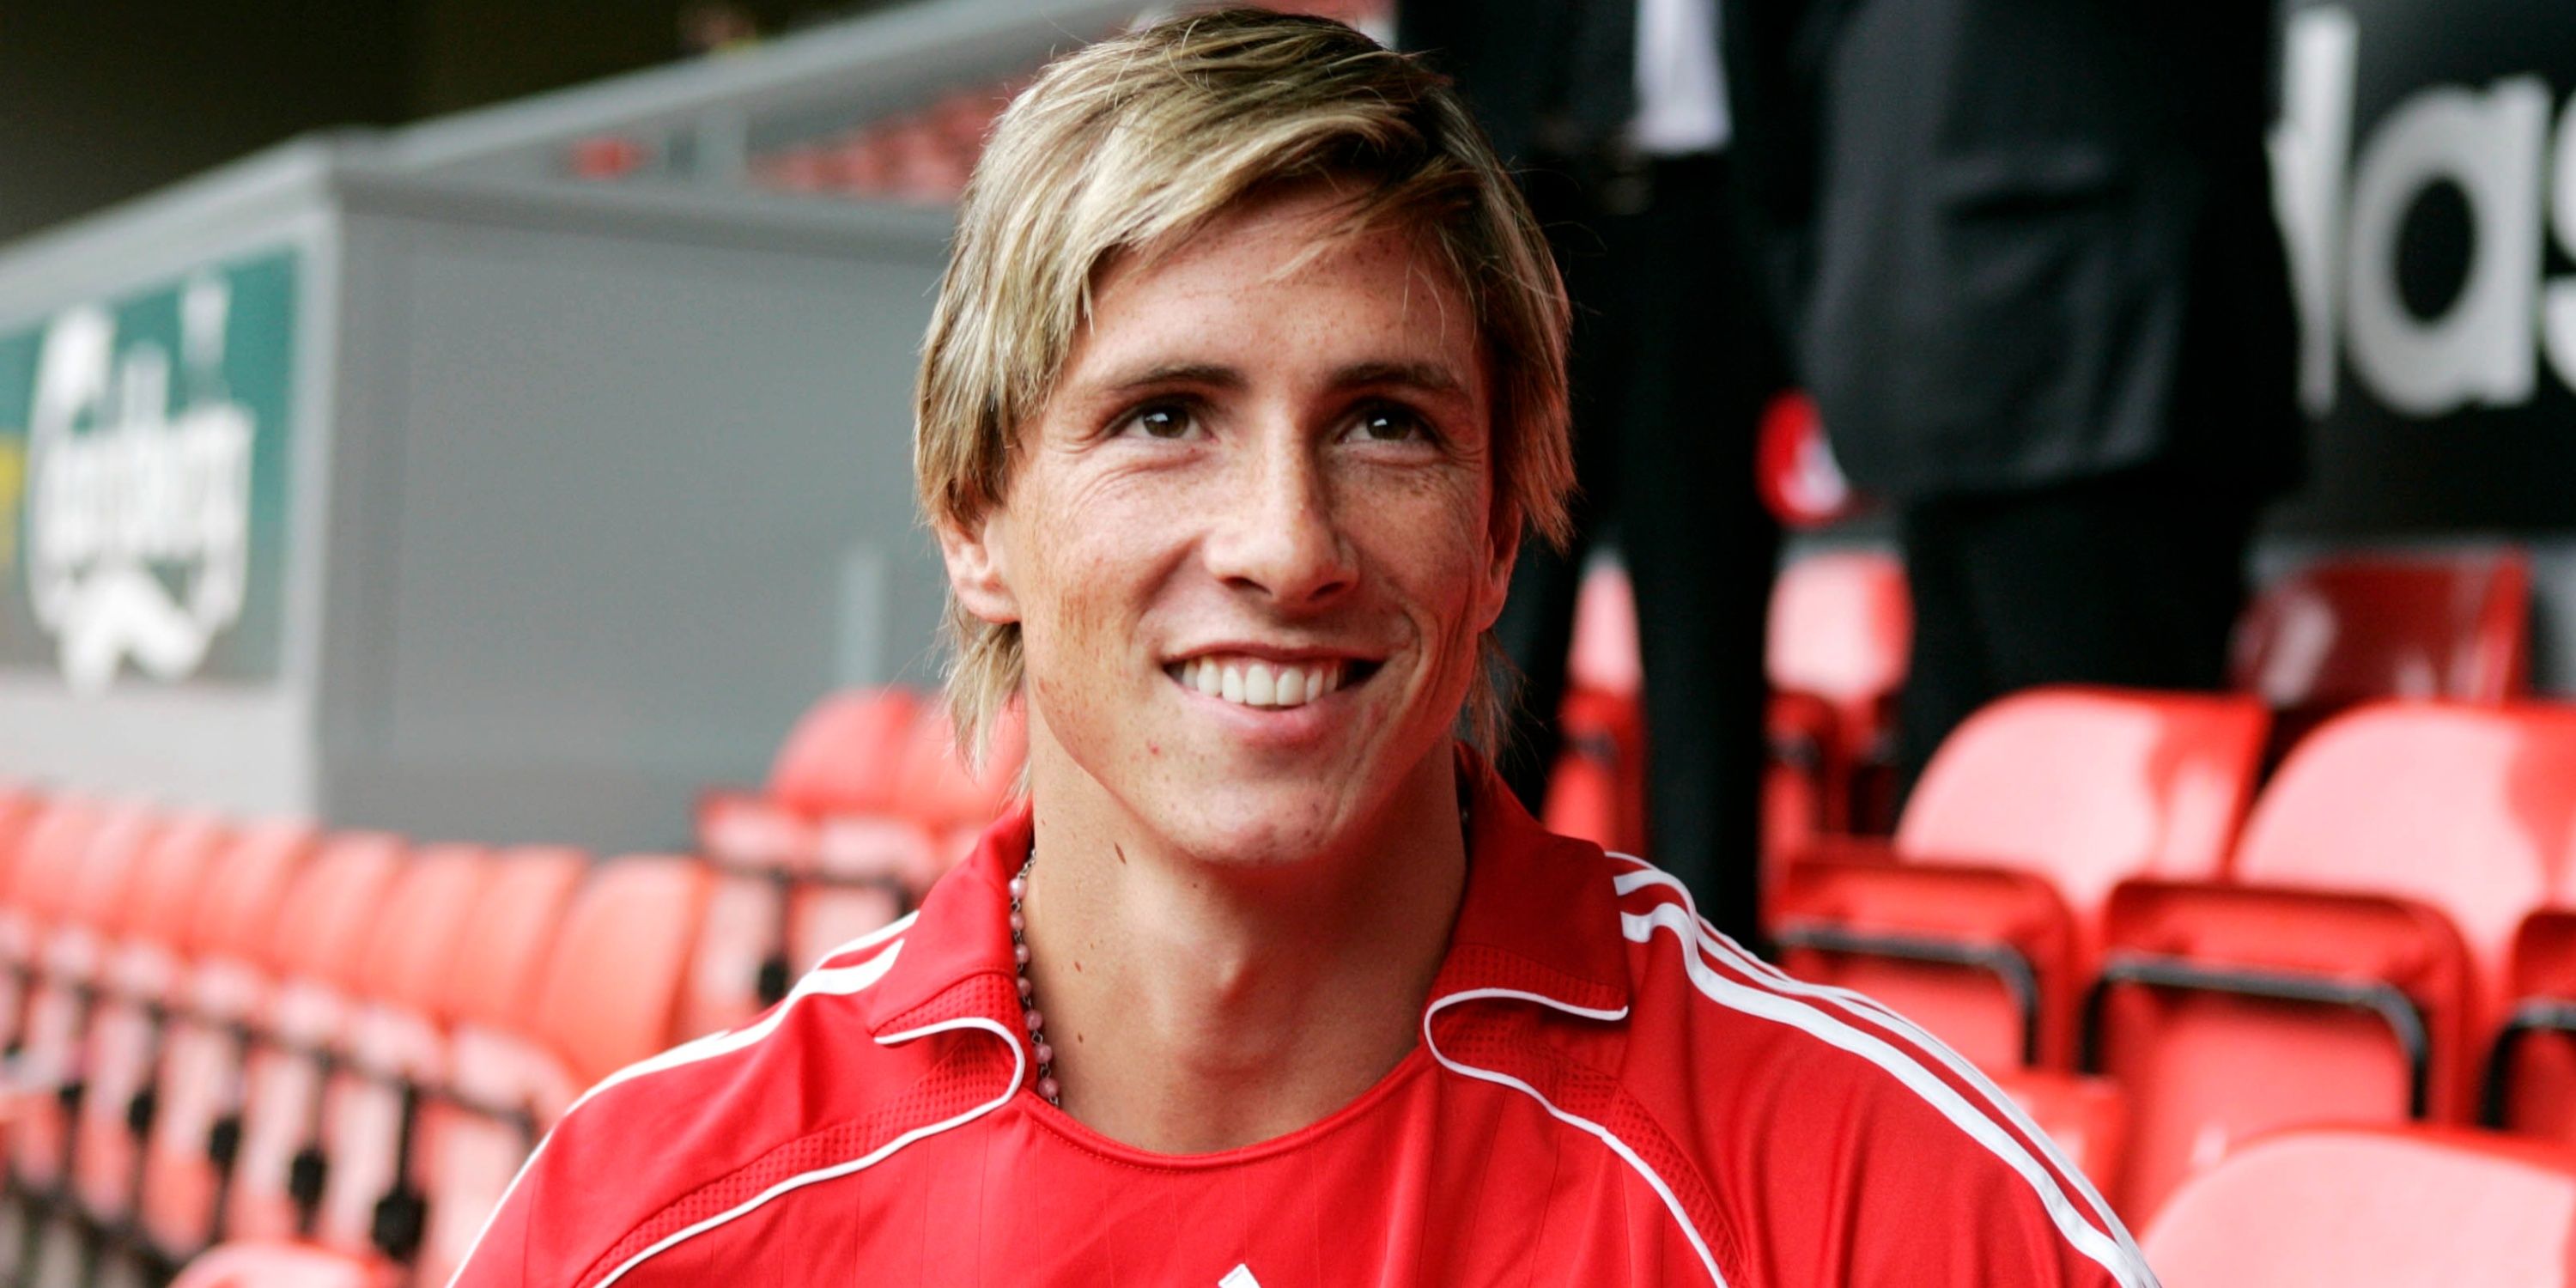 When Fernando Torres' quick-thinking led to baffling Premier League goal for Liverpool